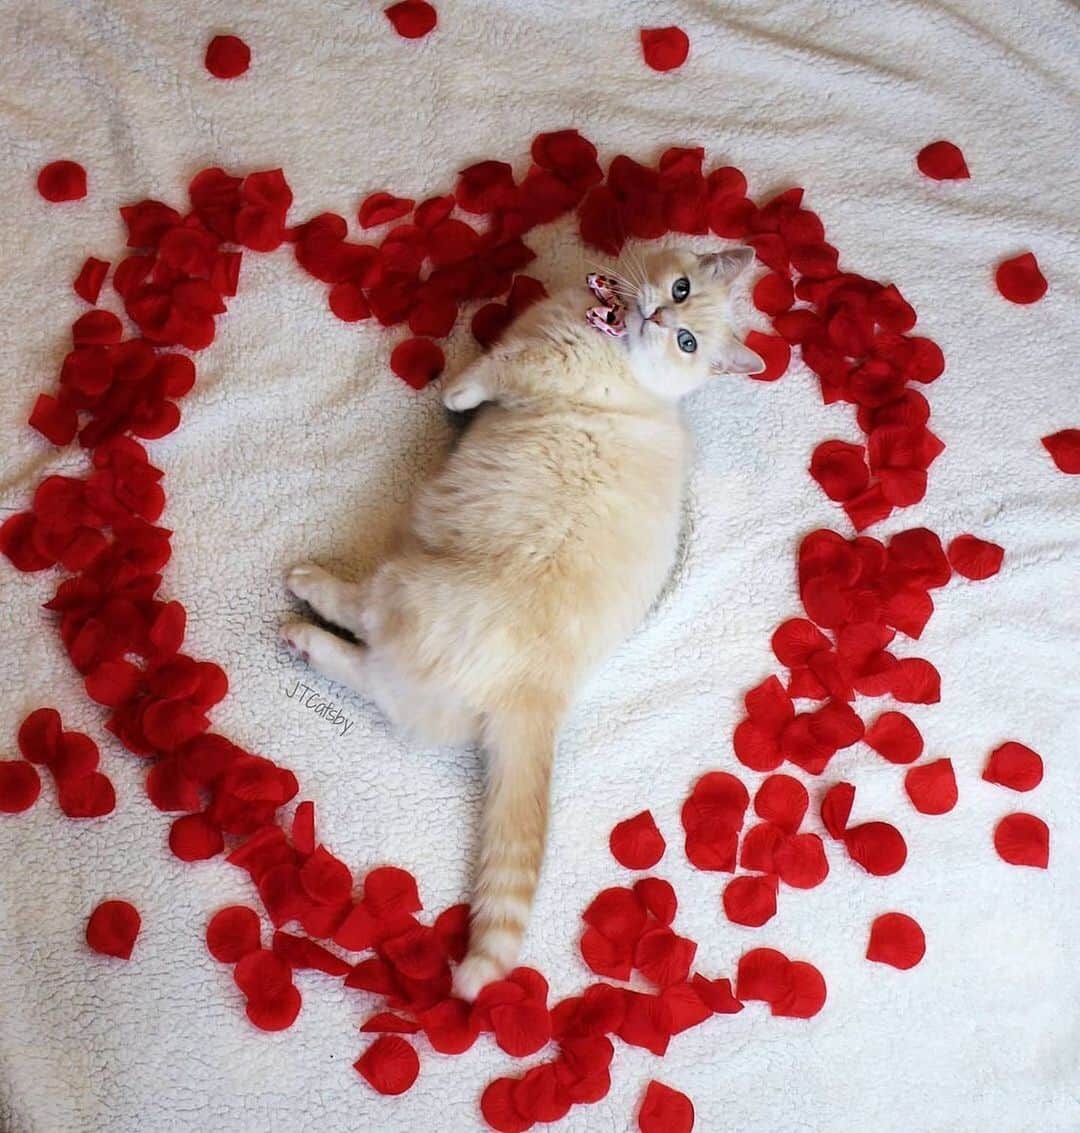 The Cats Of Instagramのインスタグラム：「#Repost • @otisandjr Rose petals and a fluffy kitty? This looks like a purrfect Valentine’s Day to me! 🌹😻❤😽🌹 How are you going to celebrate love this year? 😻😻😻 ❤ #JTCatsby ❤」